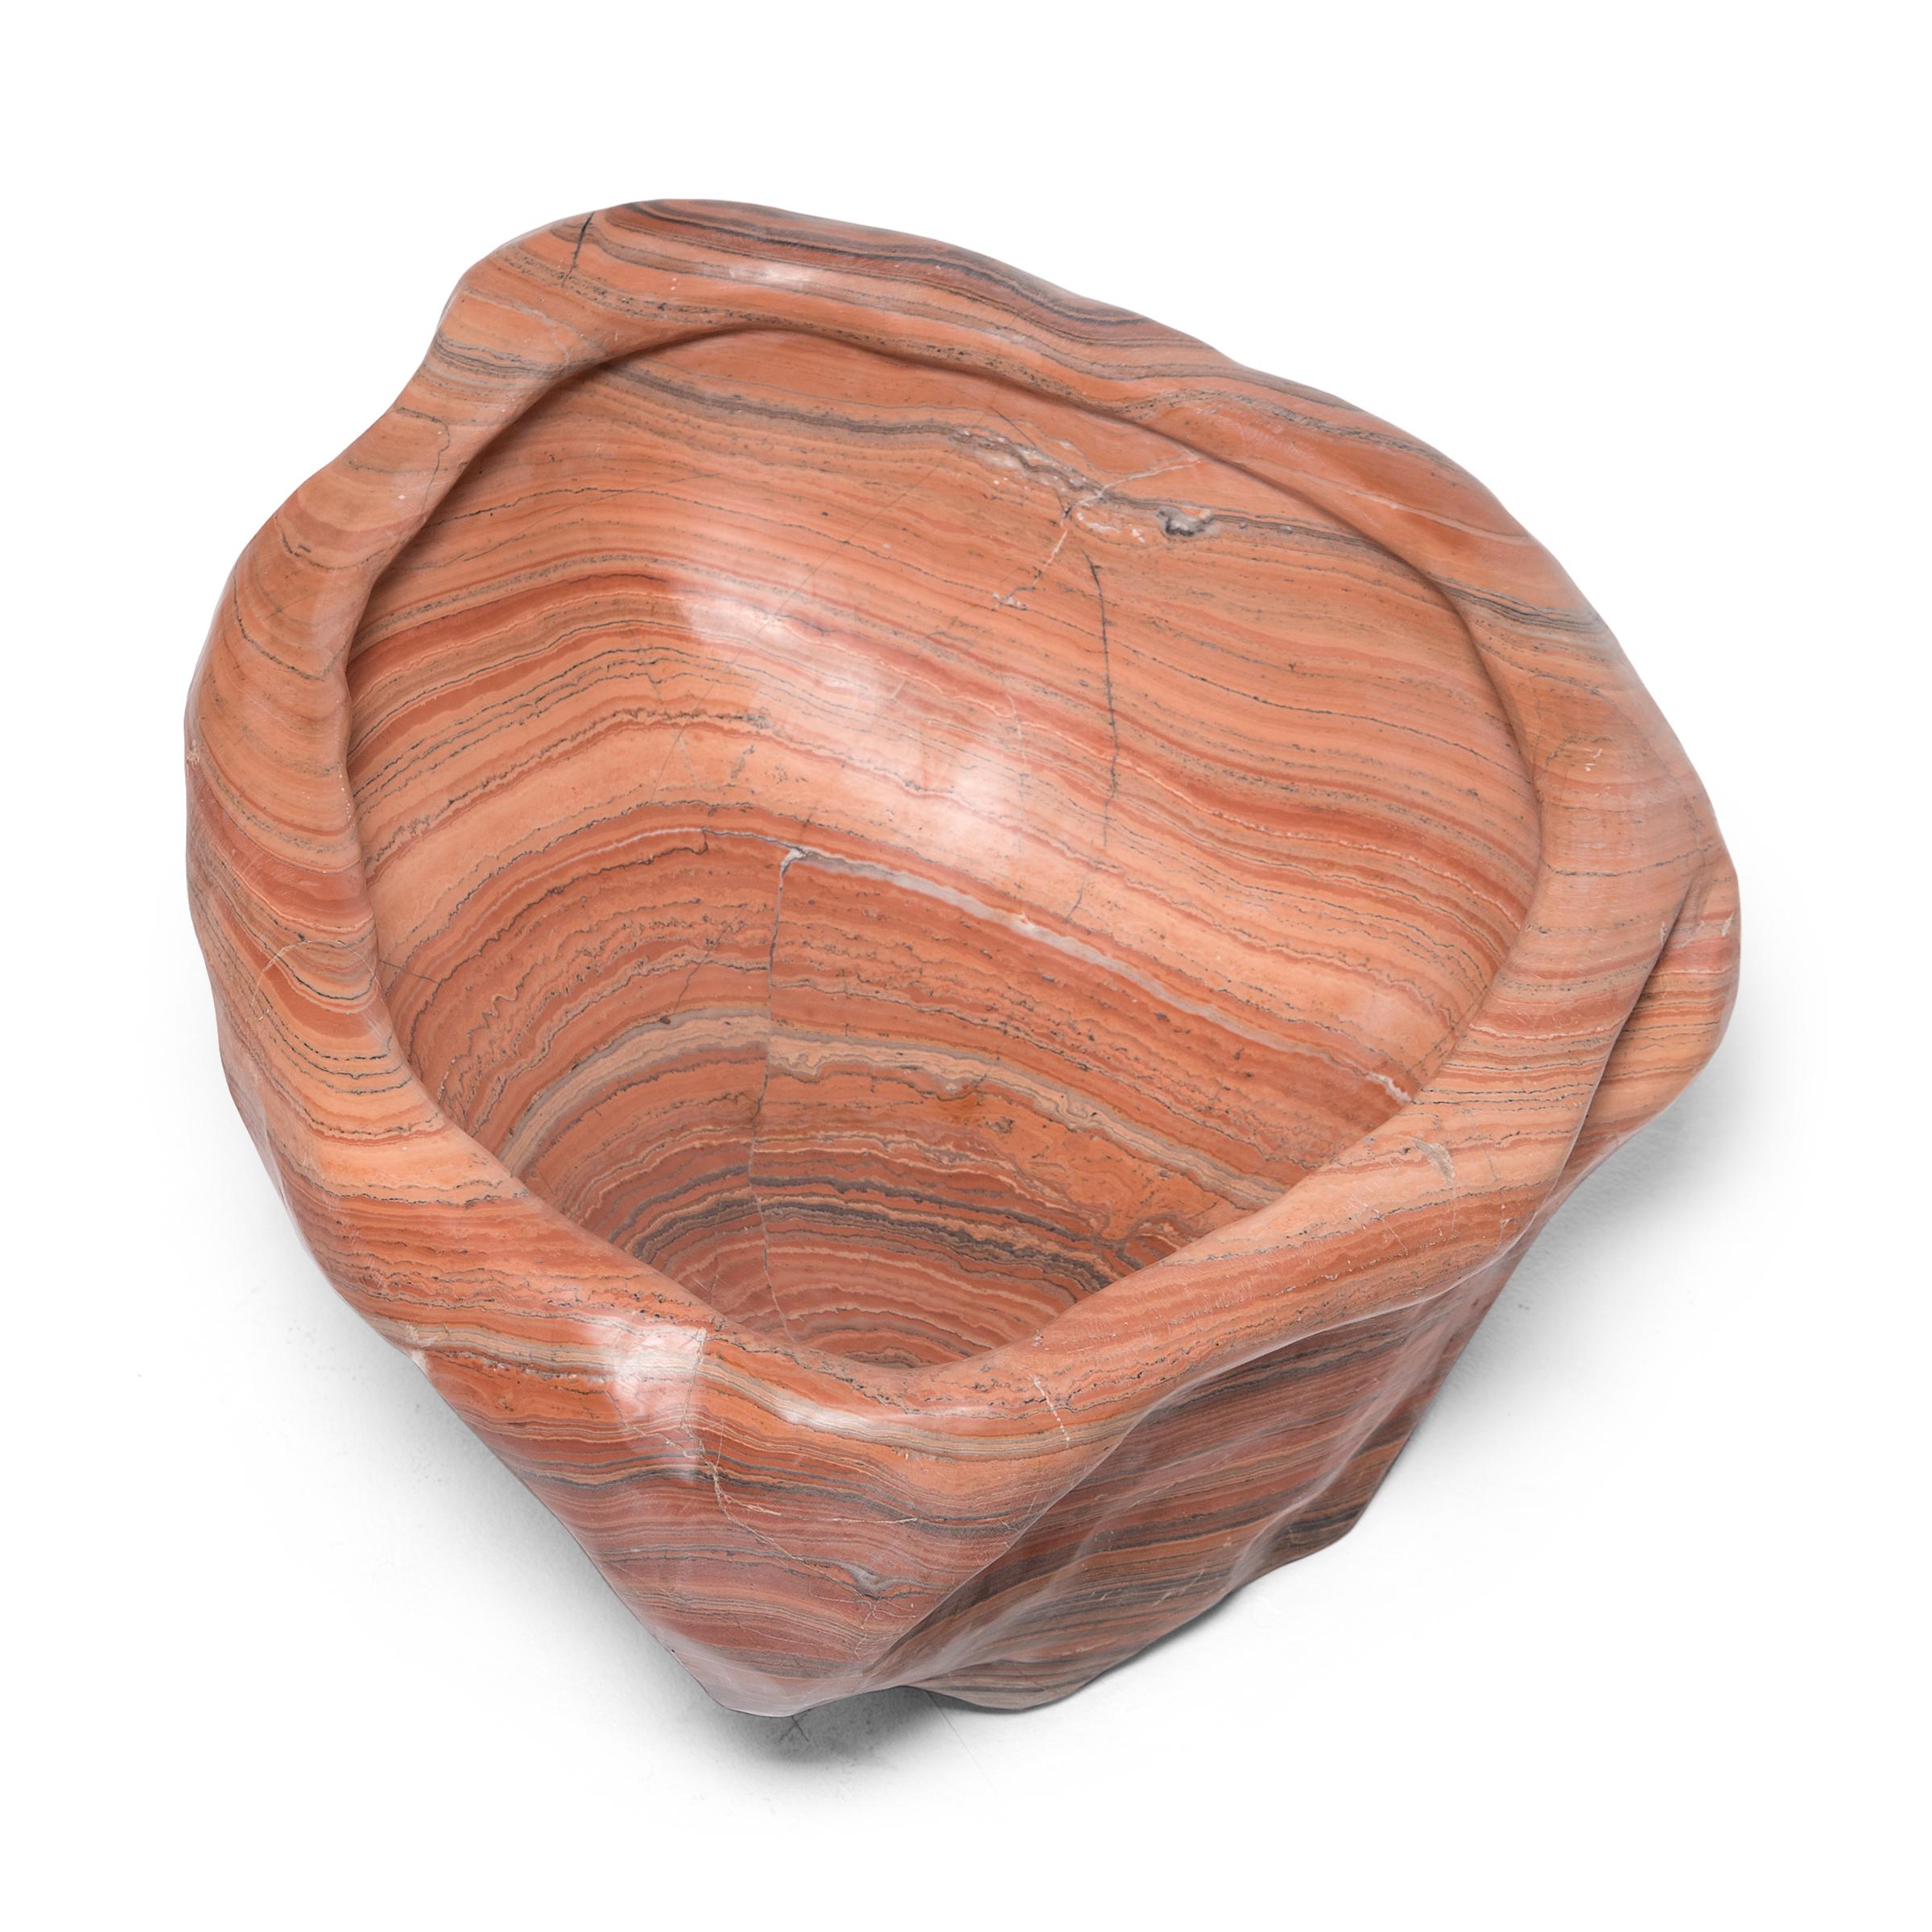 Shaped from stone sourced from the Nanyang region of China's southern coast, this colorful stone basin swirls with a gorgeous pattern of orange, pink, and grey strata. Carved with an asymmetrical form and smoothed to enhance its warm coloring, the